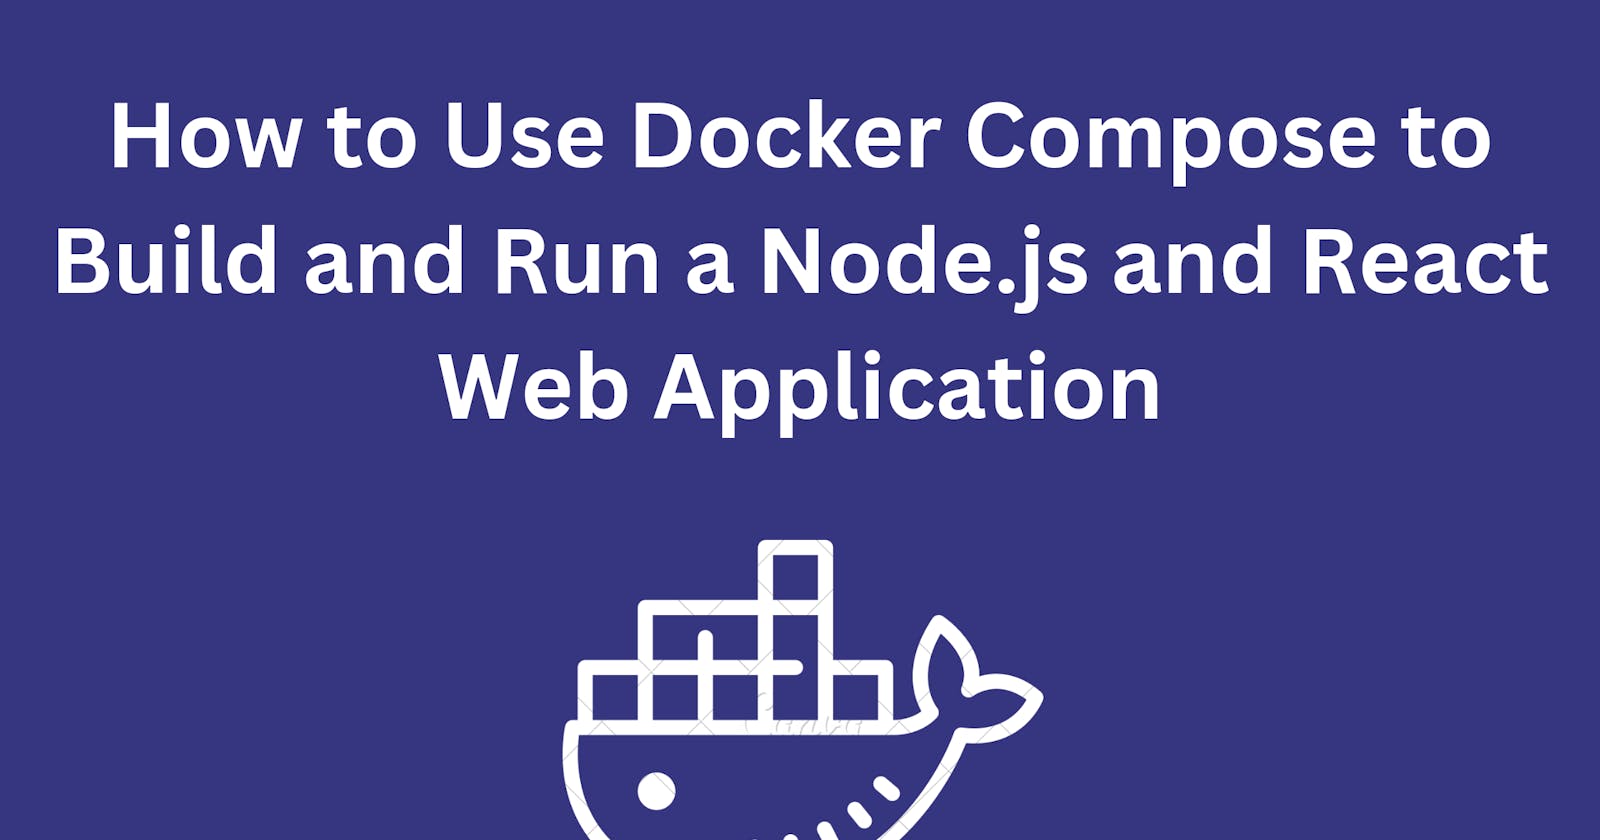 How to use Docker Compose to Build and Run a Node.js and React Web Application